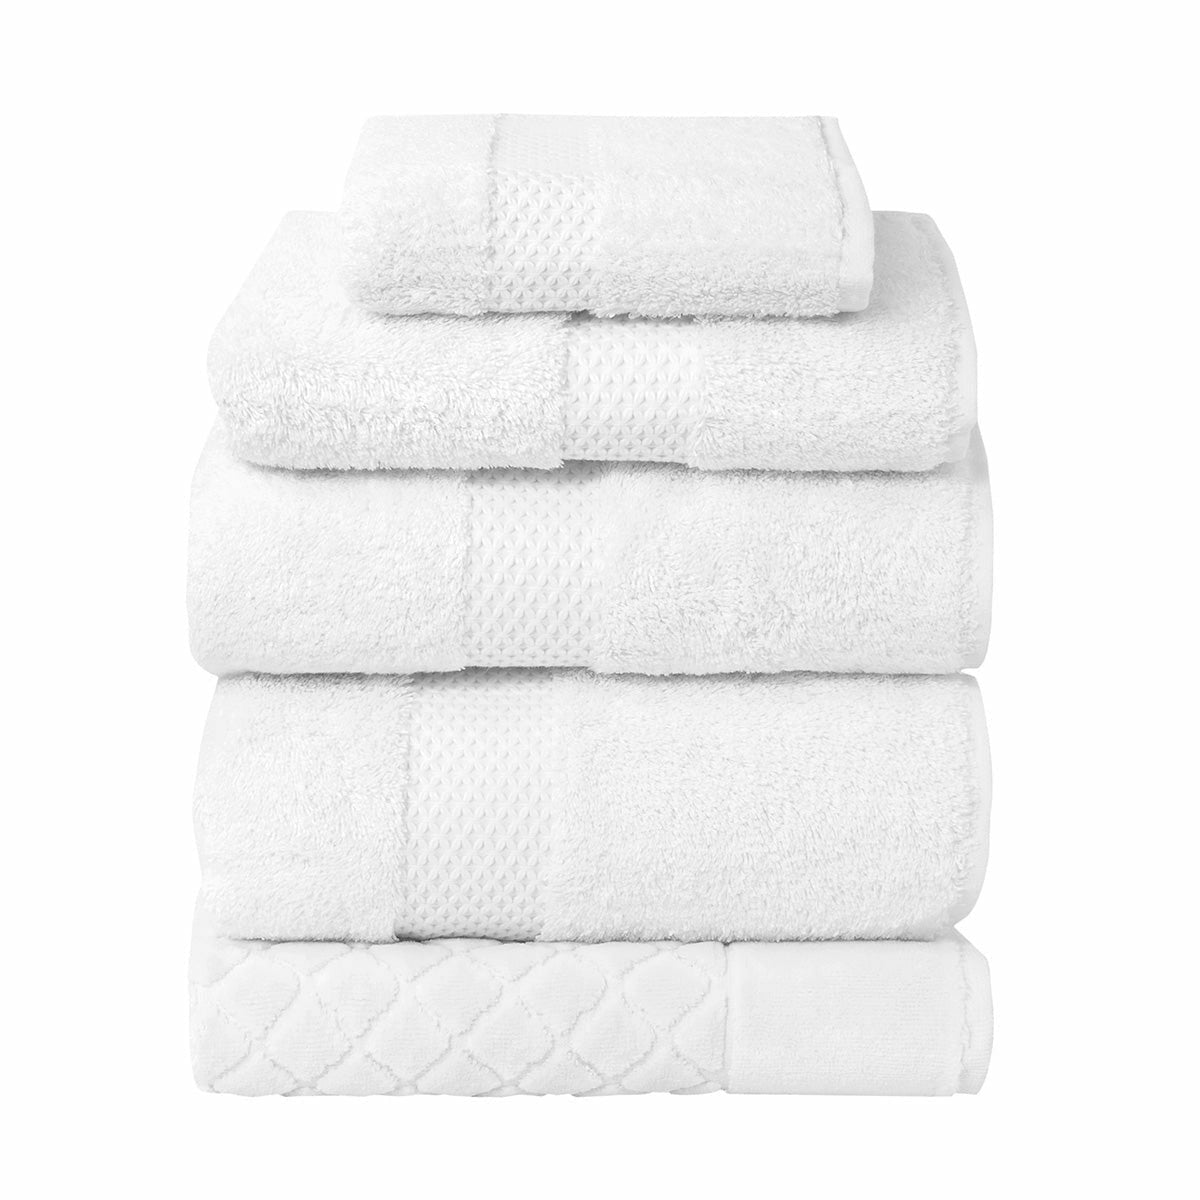 Home Decorators Collection Highly Absorbent Micro Cotton White 12-Piece Bath Towel Set